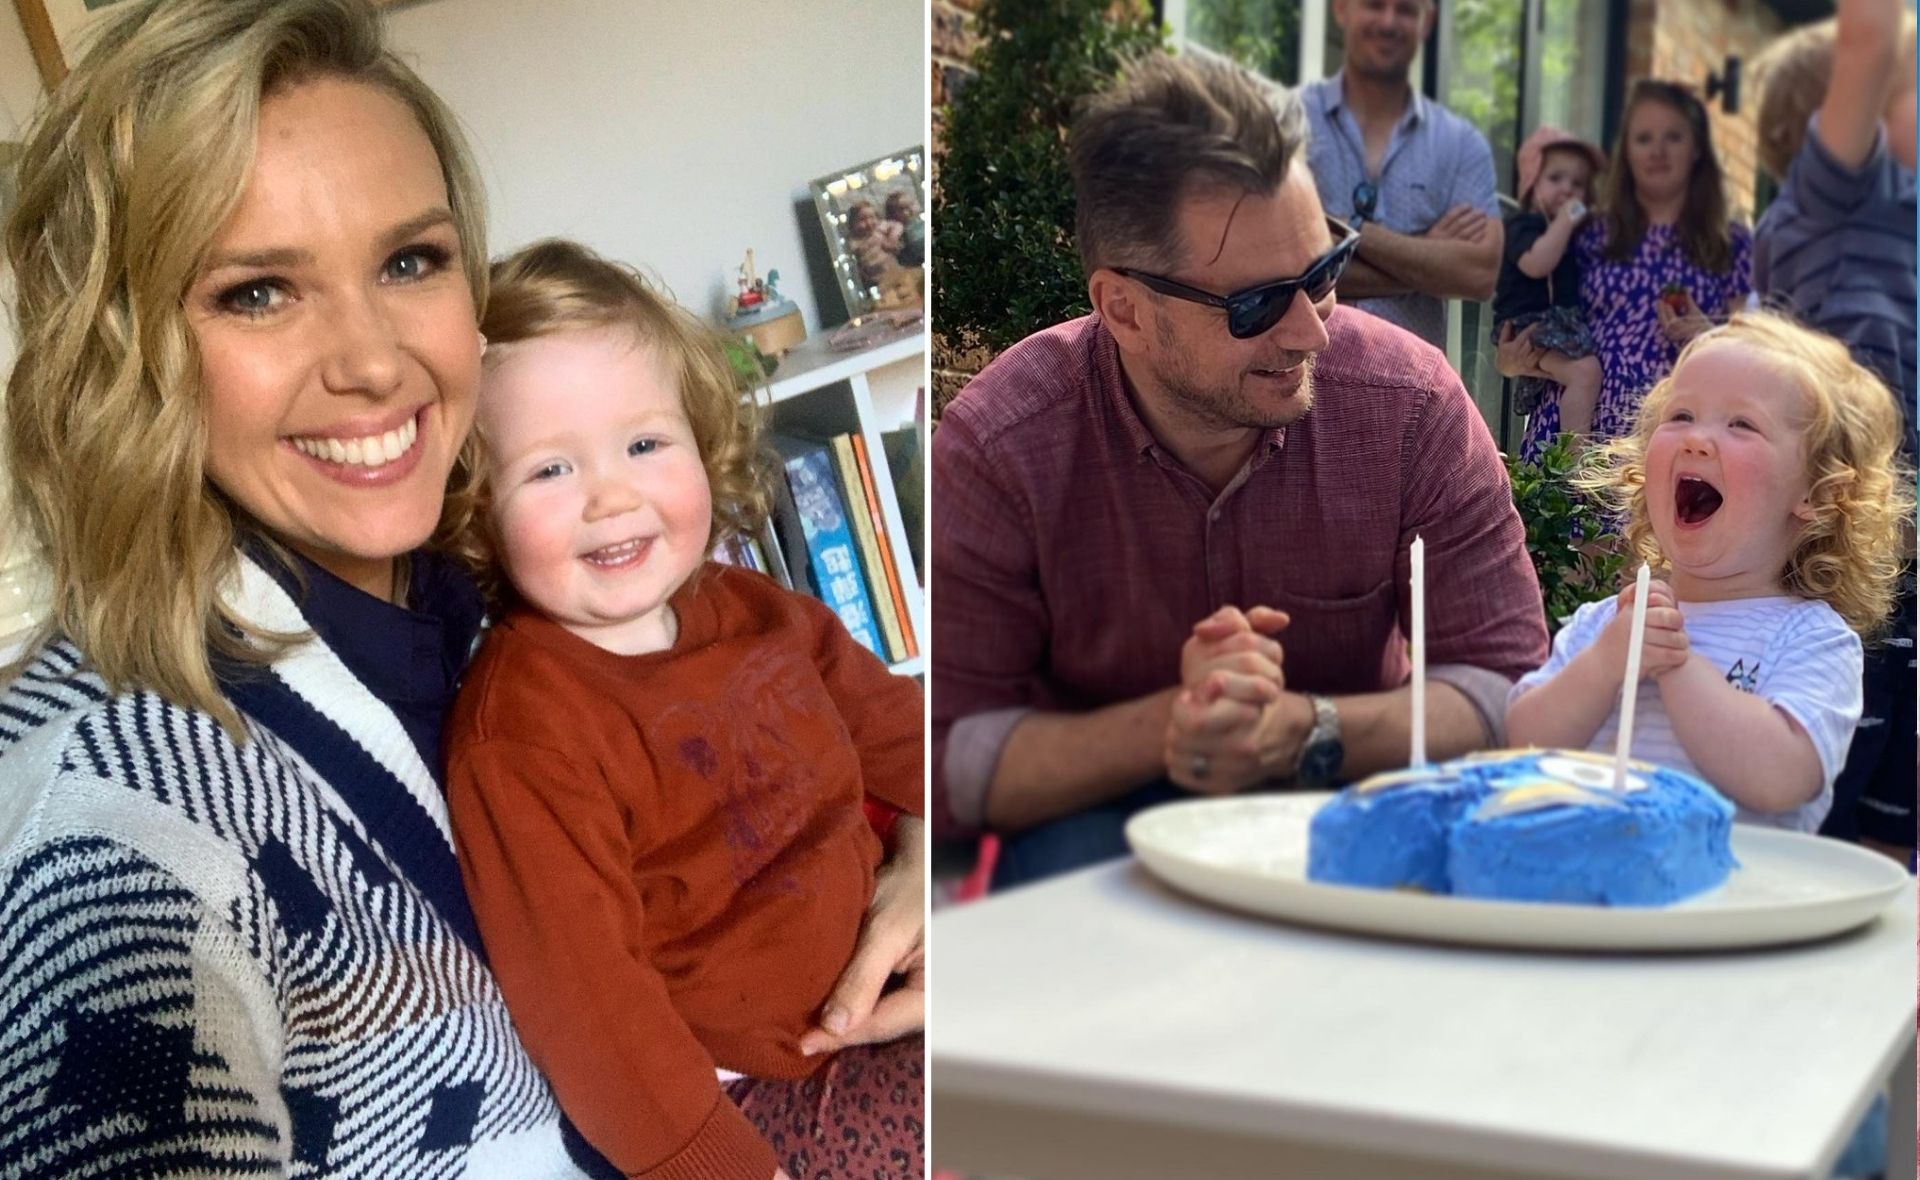 Edwina Bartholomew pulled off a spectacular celebration for daughter Molly’s second birthday – and Molly’s face says it all